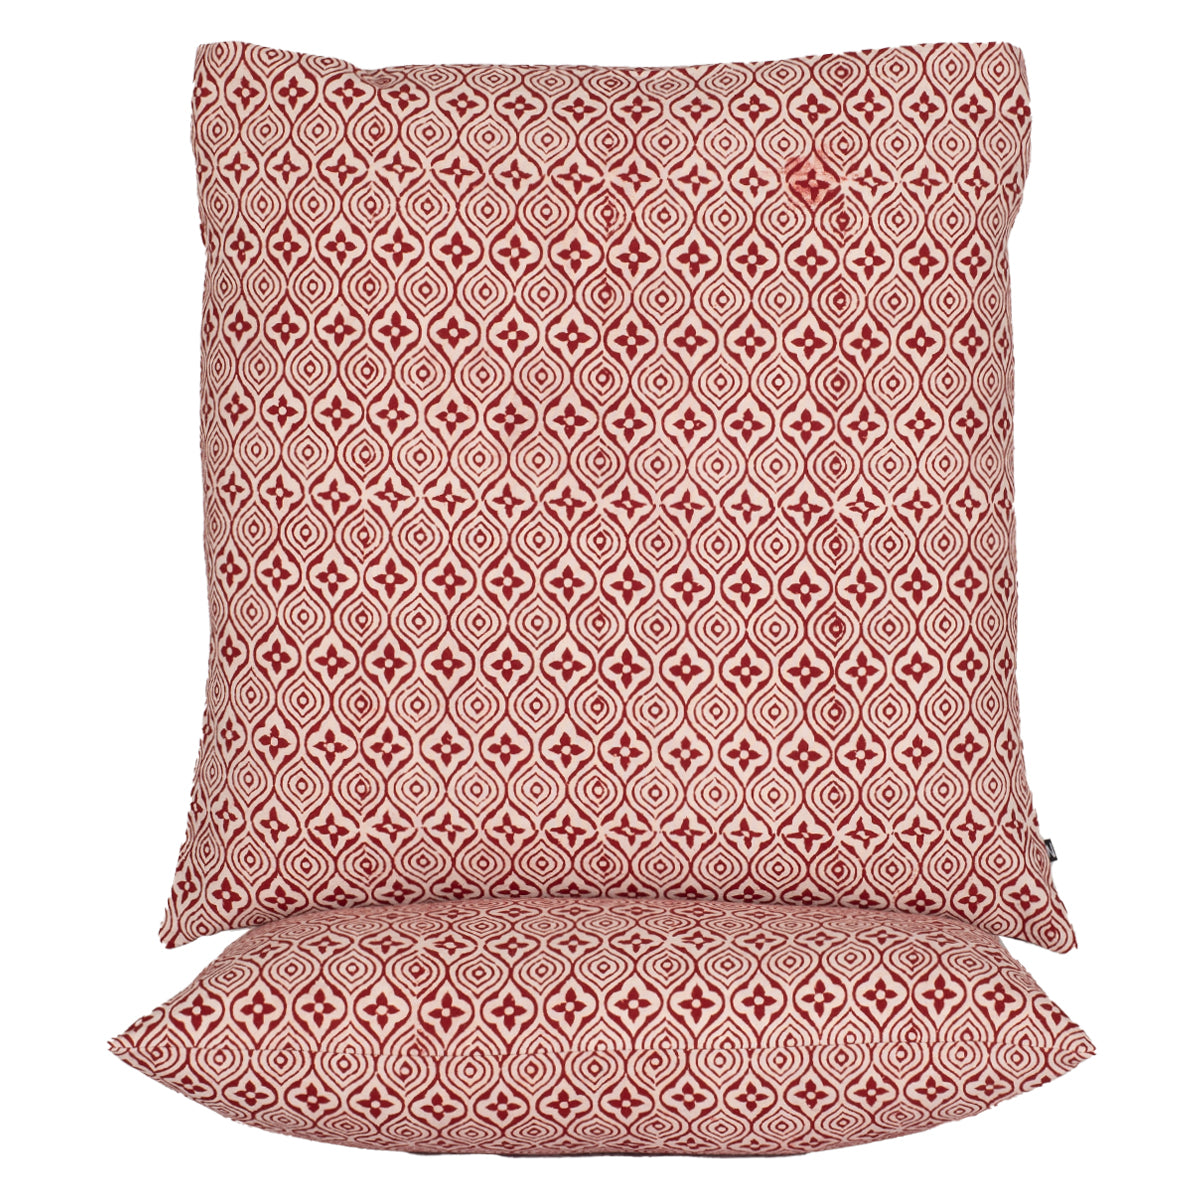 Flower Tile Bagh Hand Block Print Cotton Cushion Cover - Red White-1